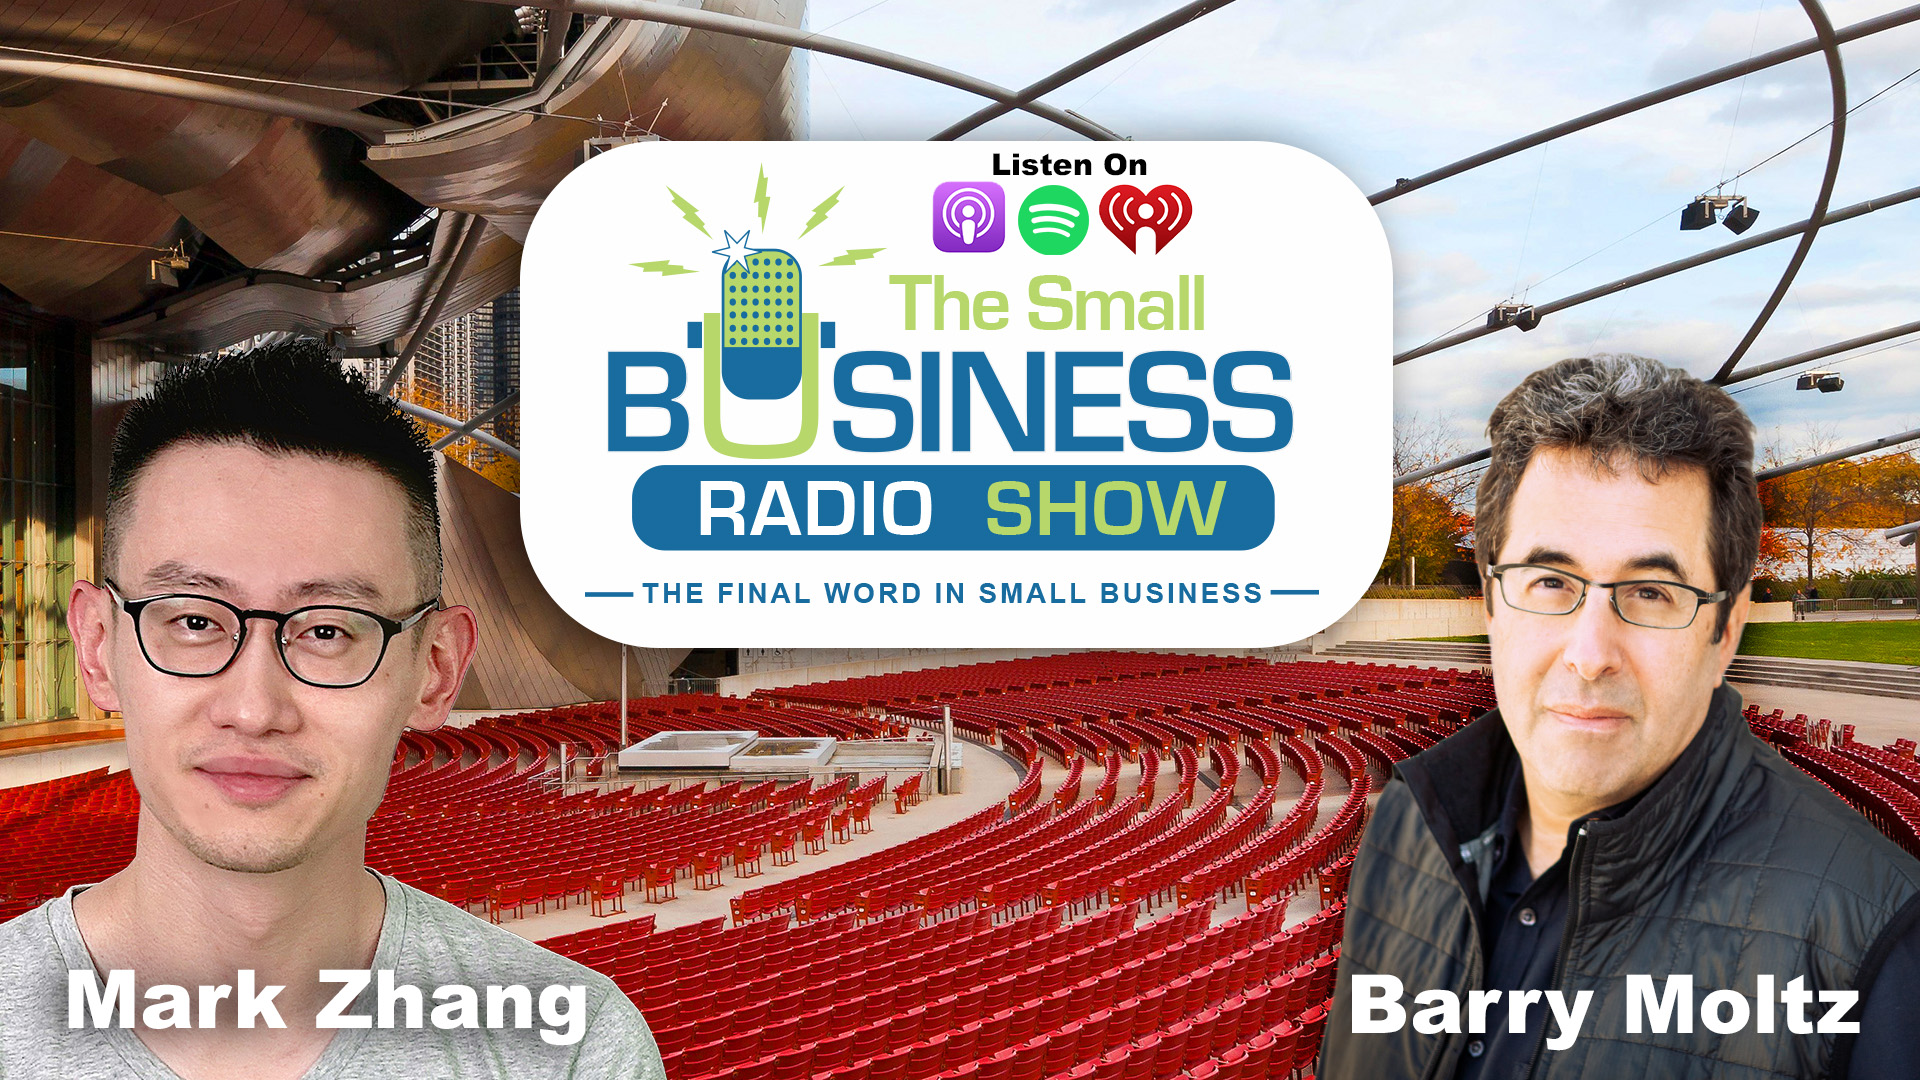 Mark Zhang on The Small Business Radio Show